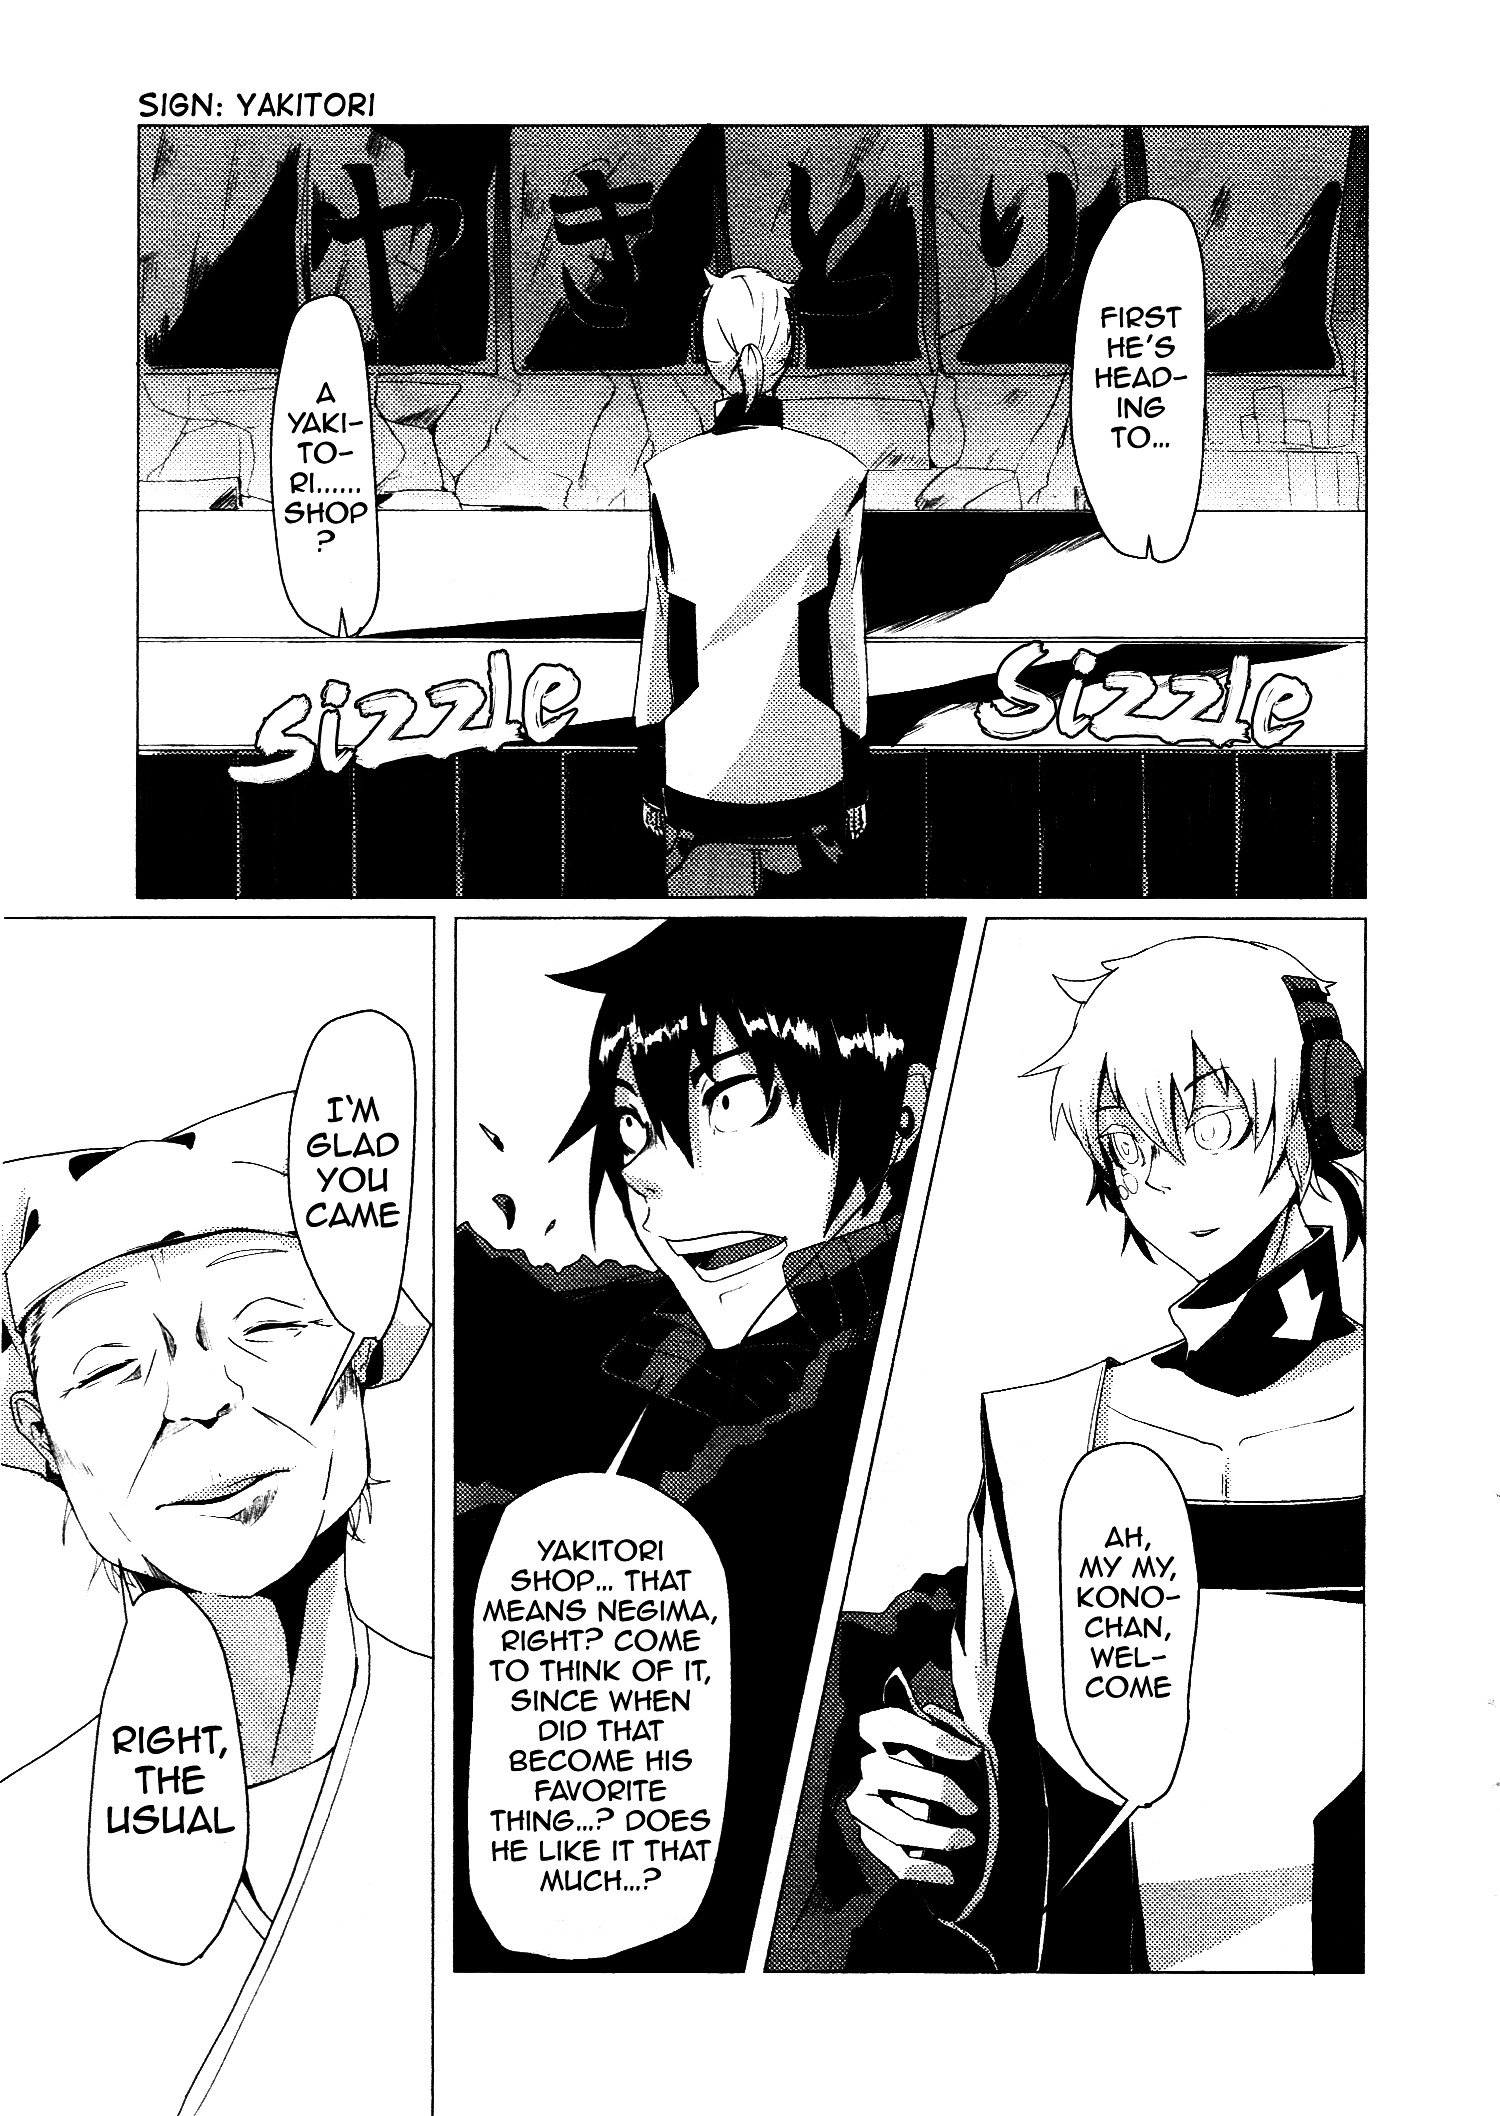 Kagerou Daze Official Anthology Comic -Summer- Vol.1 Chapter 12 : Konoha, Summer, And I (Physics) By Ryuuseee - Picture 3